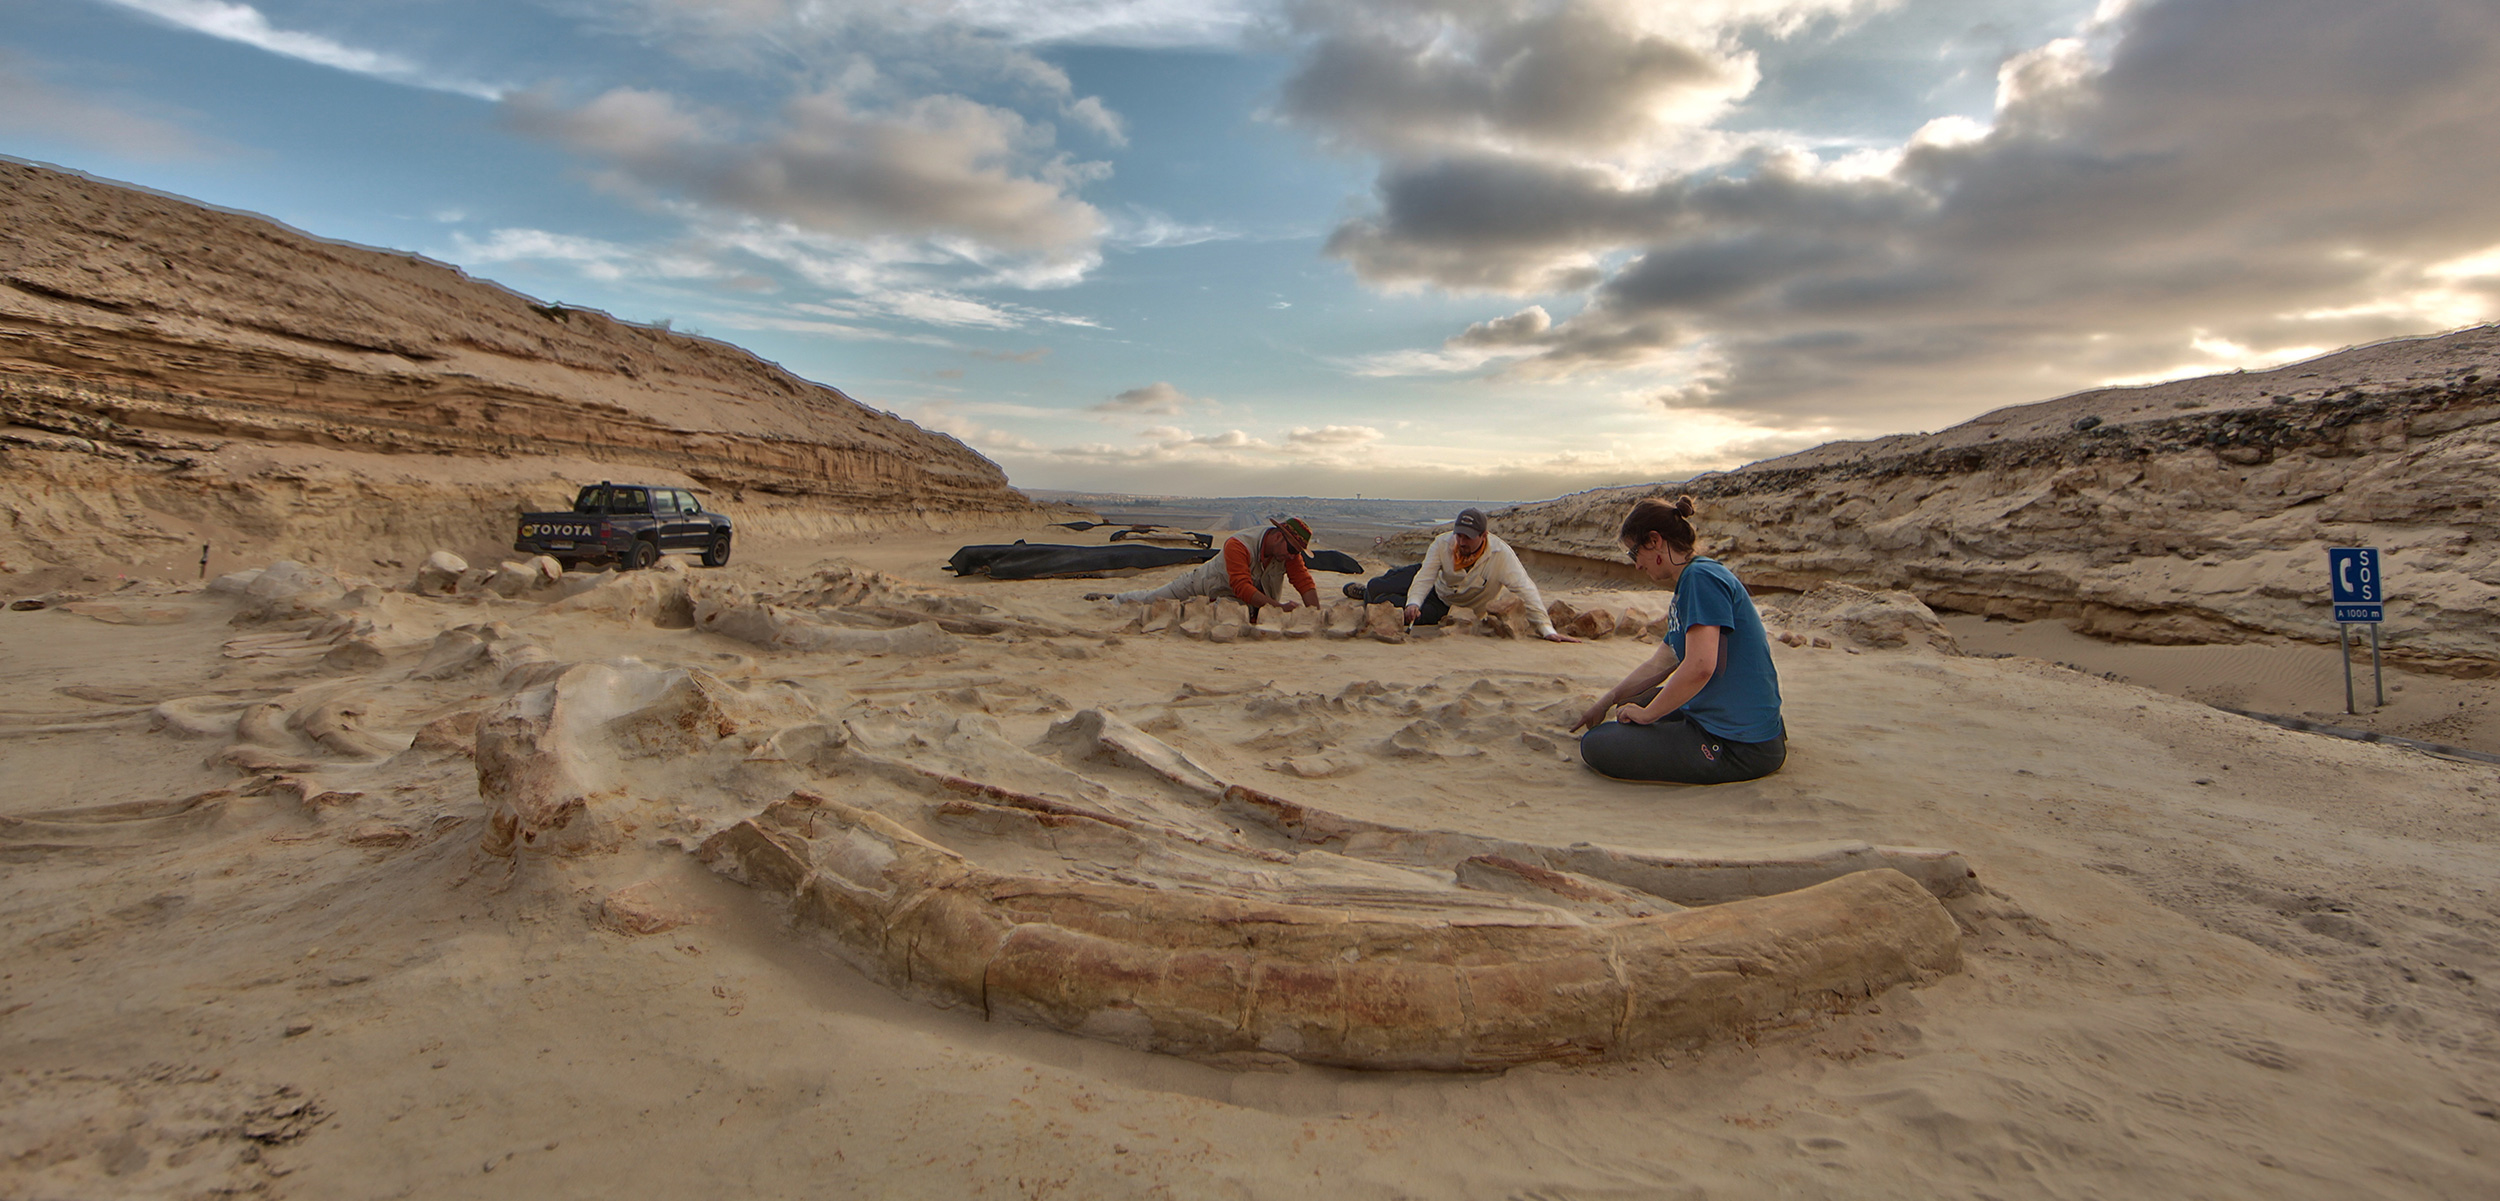 Chilean and American scientists study several fossil whale skeletons at Cerro Ballena (whale hill) in Chile’s Atacama Desert in 2011. Photo by Adam Metallo/Smithsonian Institution